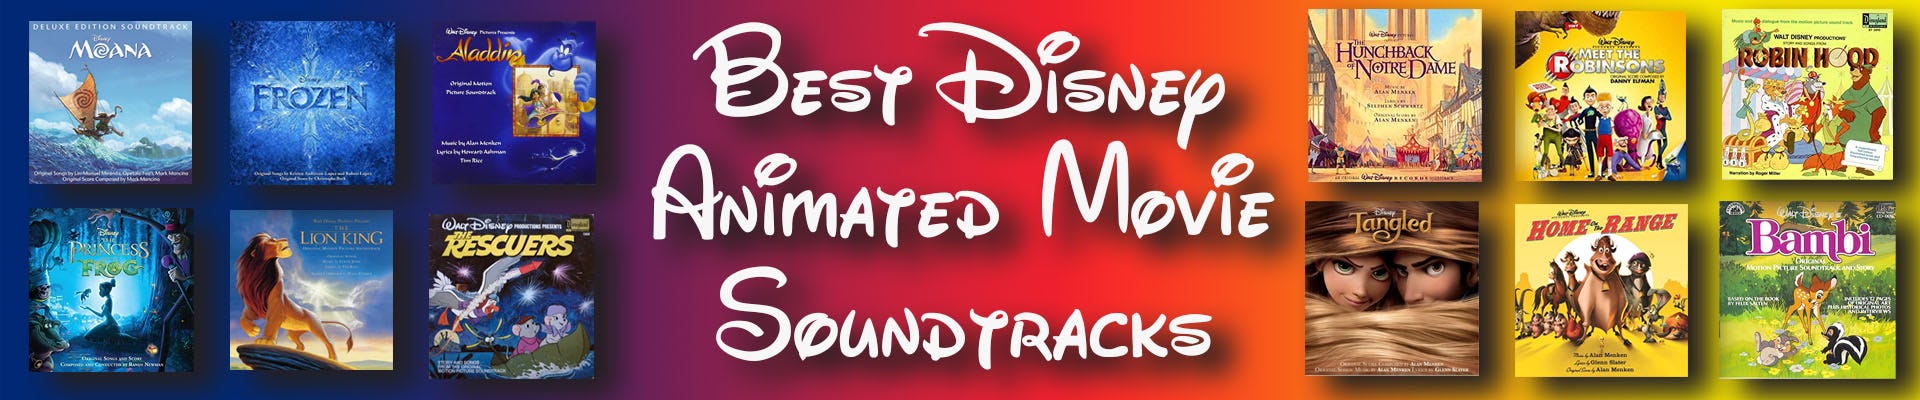 We Calculated The Best Animated Disney Musical Soundtrack Ever By Daniel L Cinenation Medium